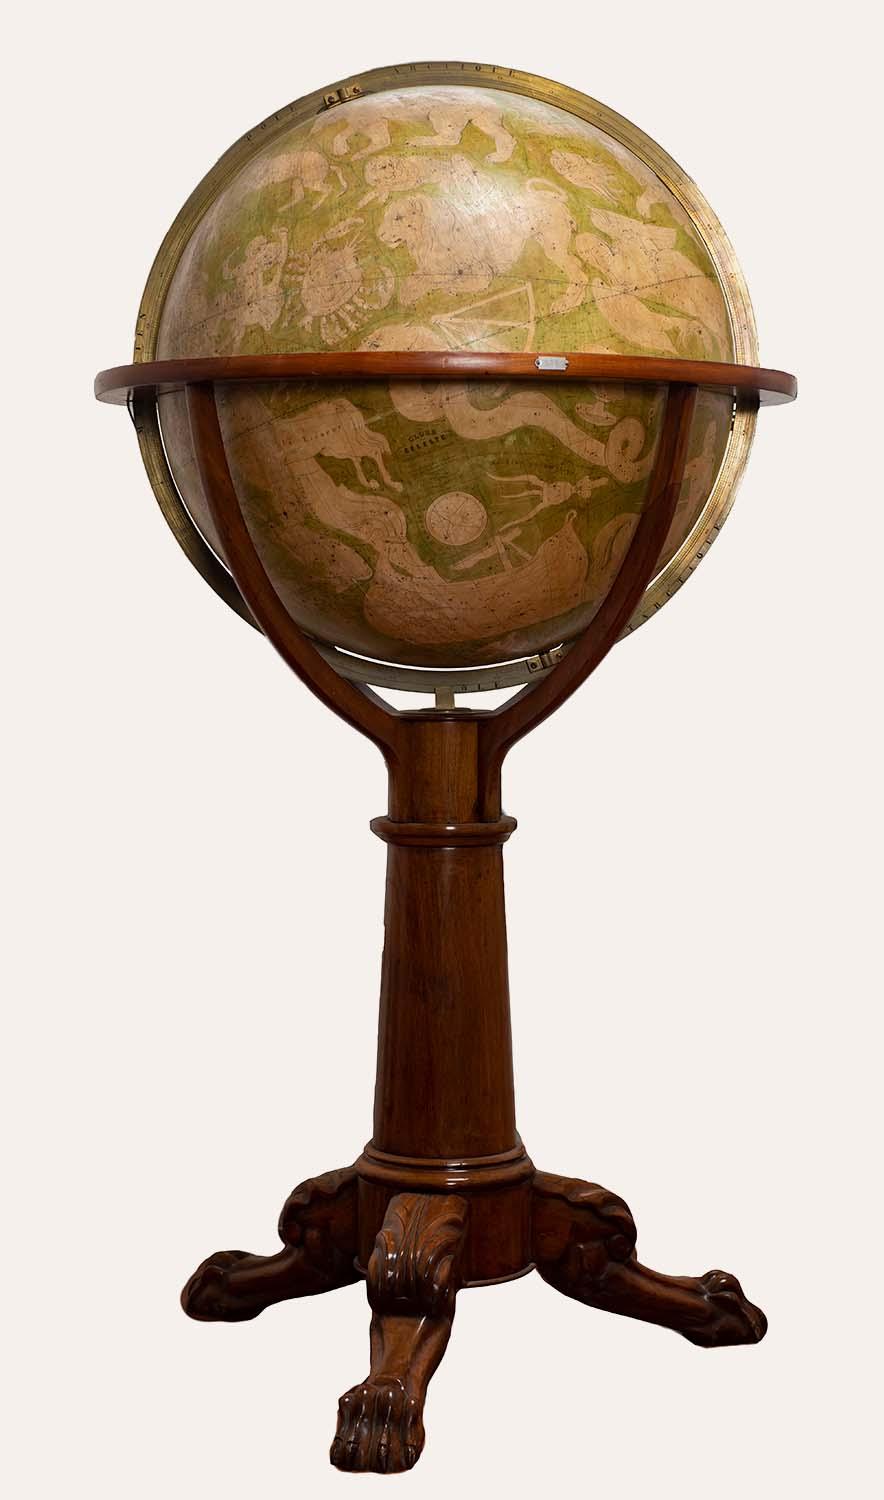 Two antique globes once in Ruffo's collection: the Globo Celeste (left) and the Globo Terrestre (right)
